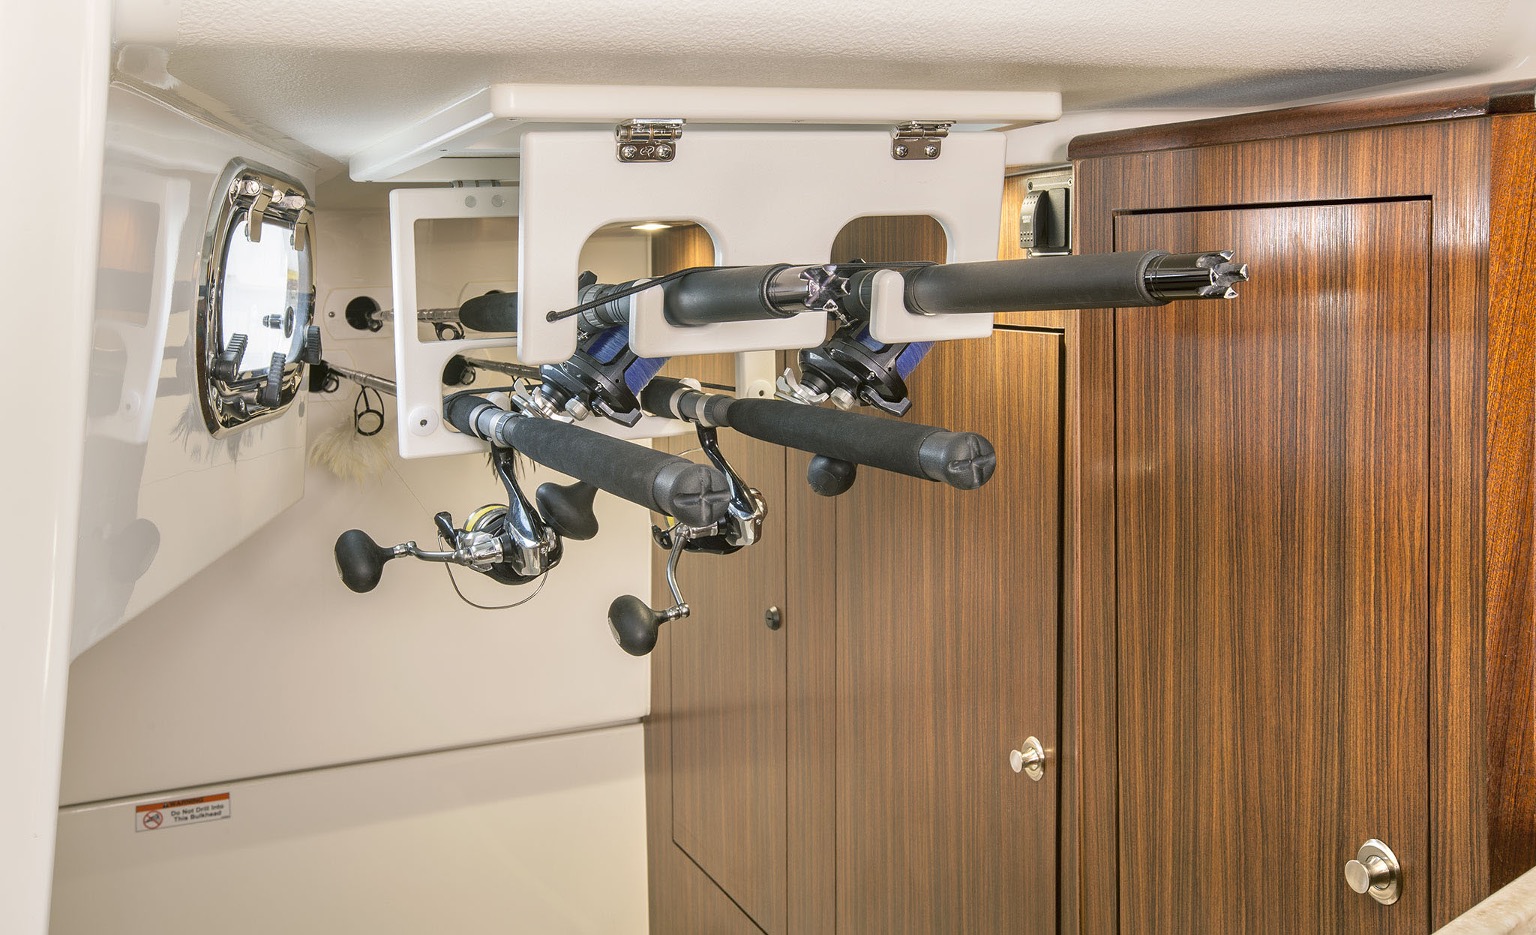 Picture2Ample rod holders and rod storage capacity are available to power up any fishing adventure.